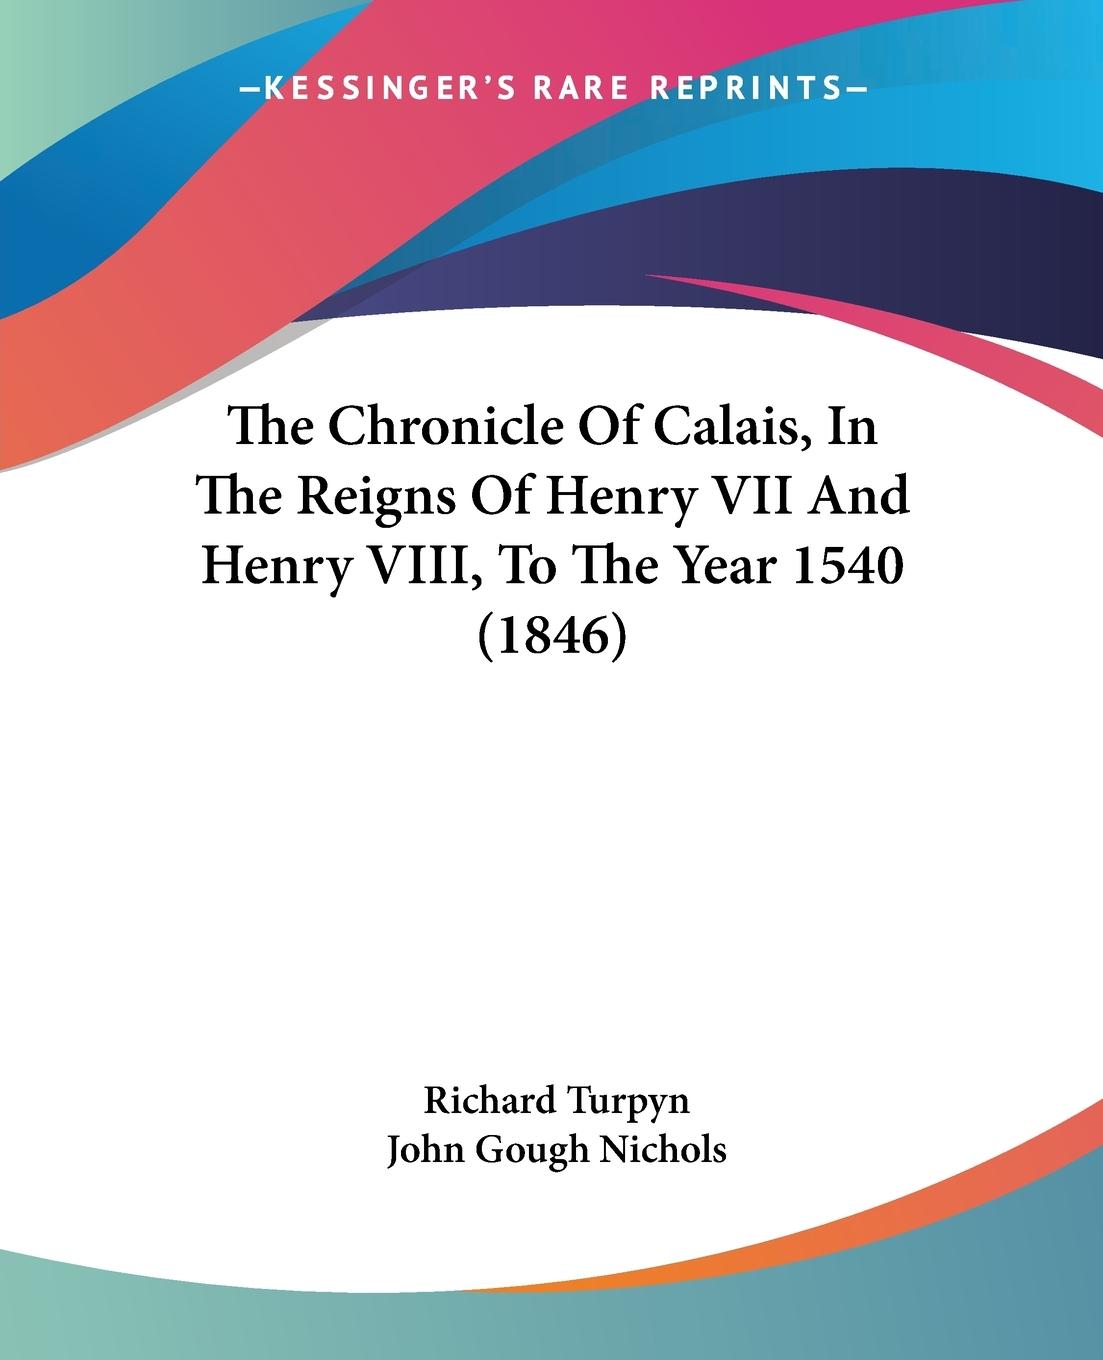 The Chronicle Of Calais, In The Reigns Of Henry VII And Henry VIII, To The Year 1540 (1846) - Turpyn, Richard